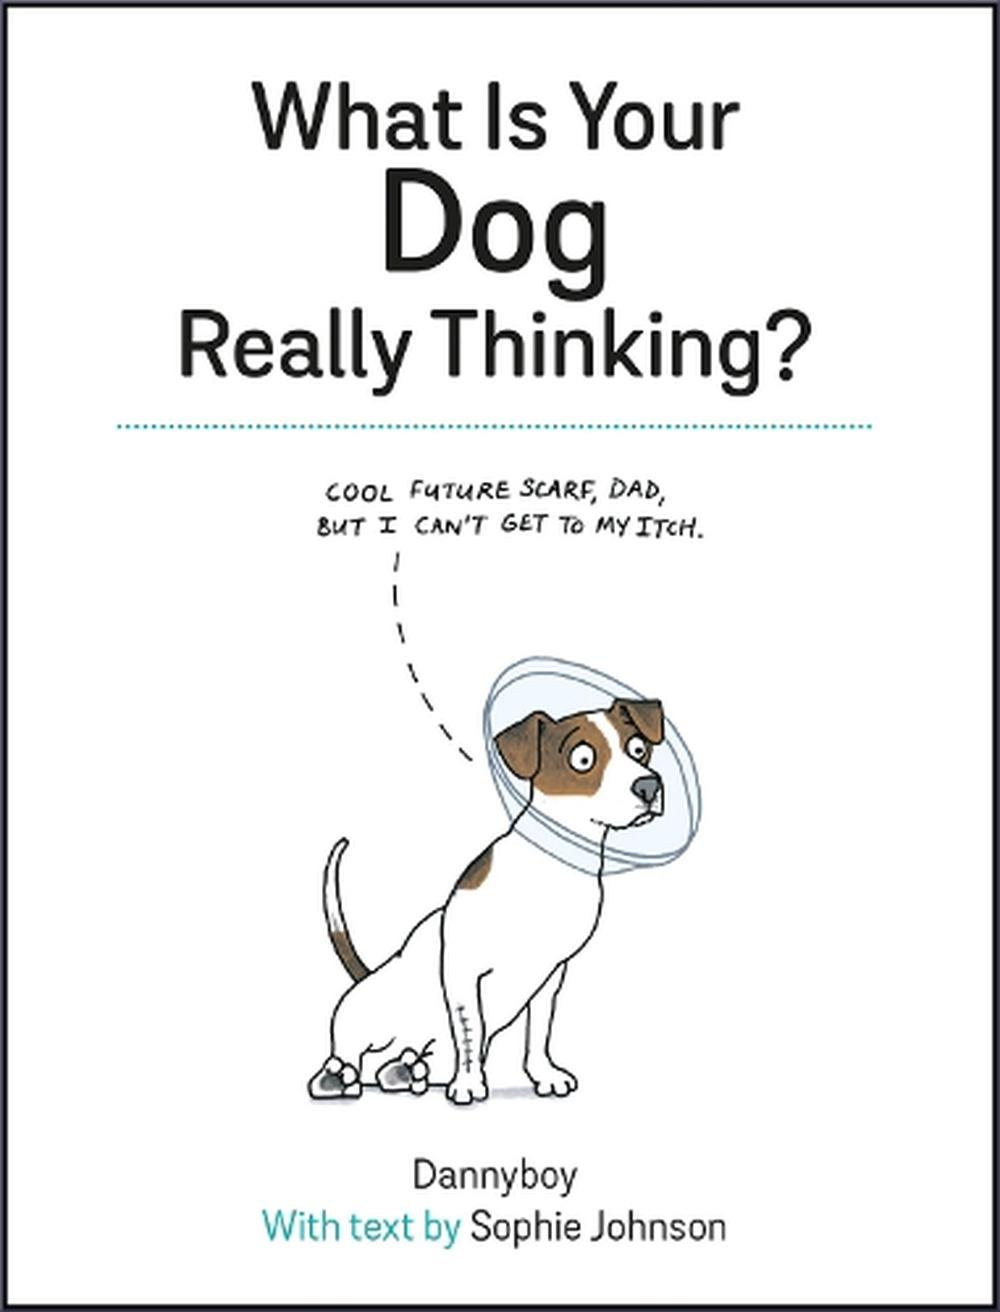 What Is My Dog Really Thinking?